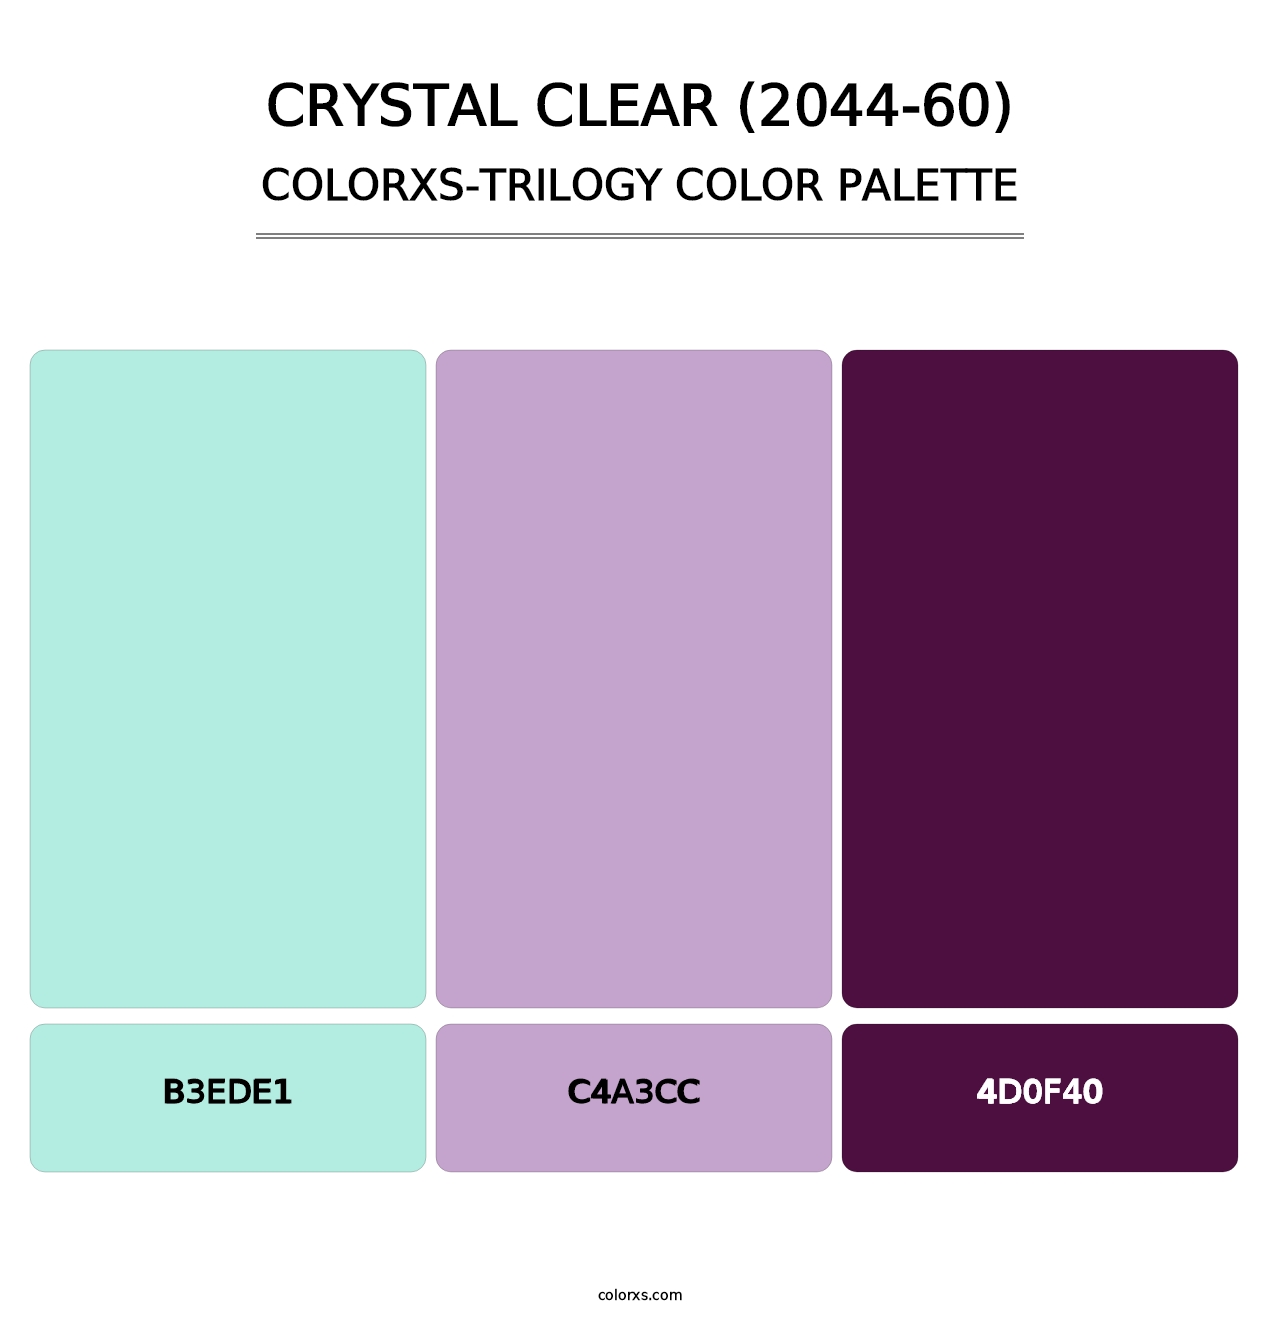 Crystal Clear (2044-60) - Colorxs Trilogy Palette